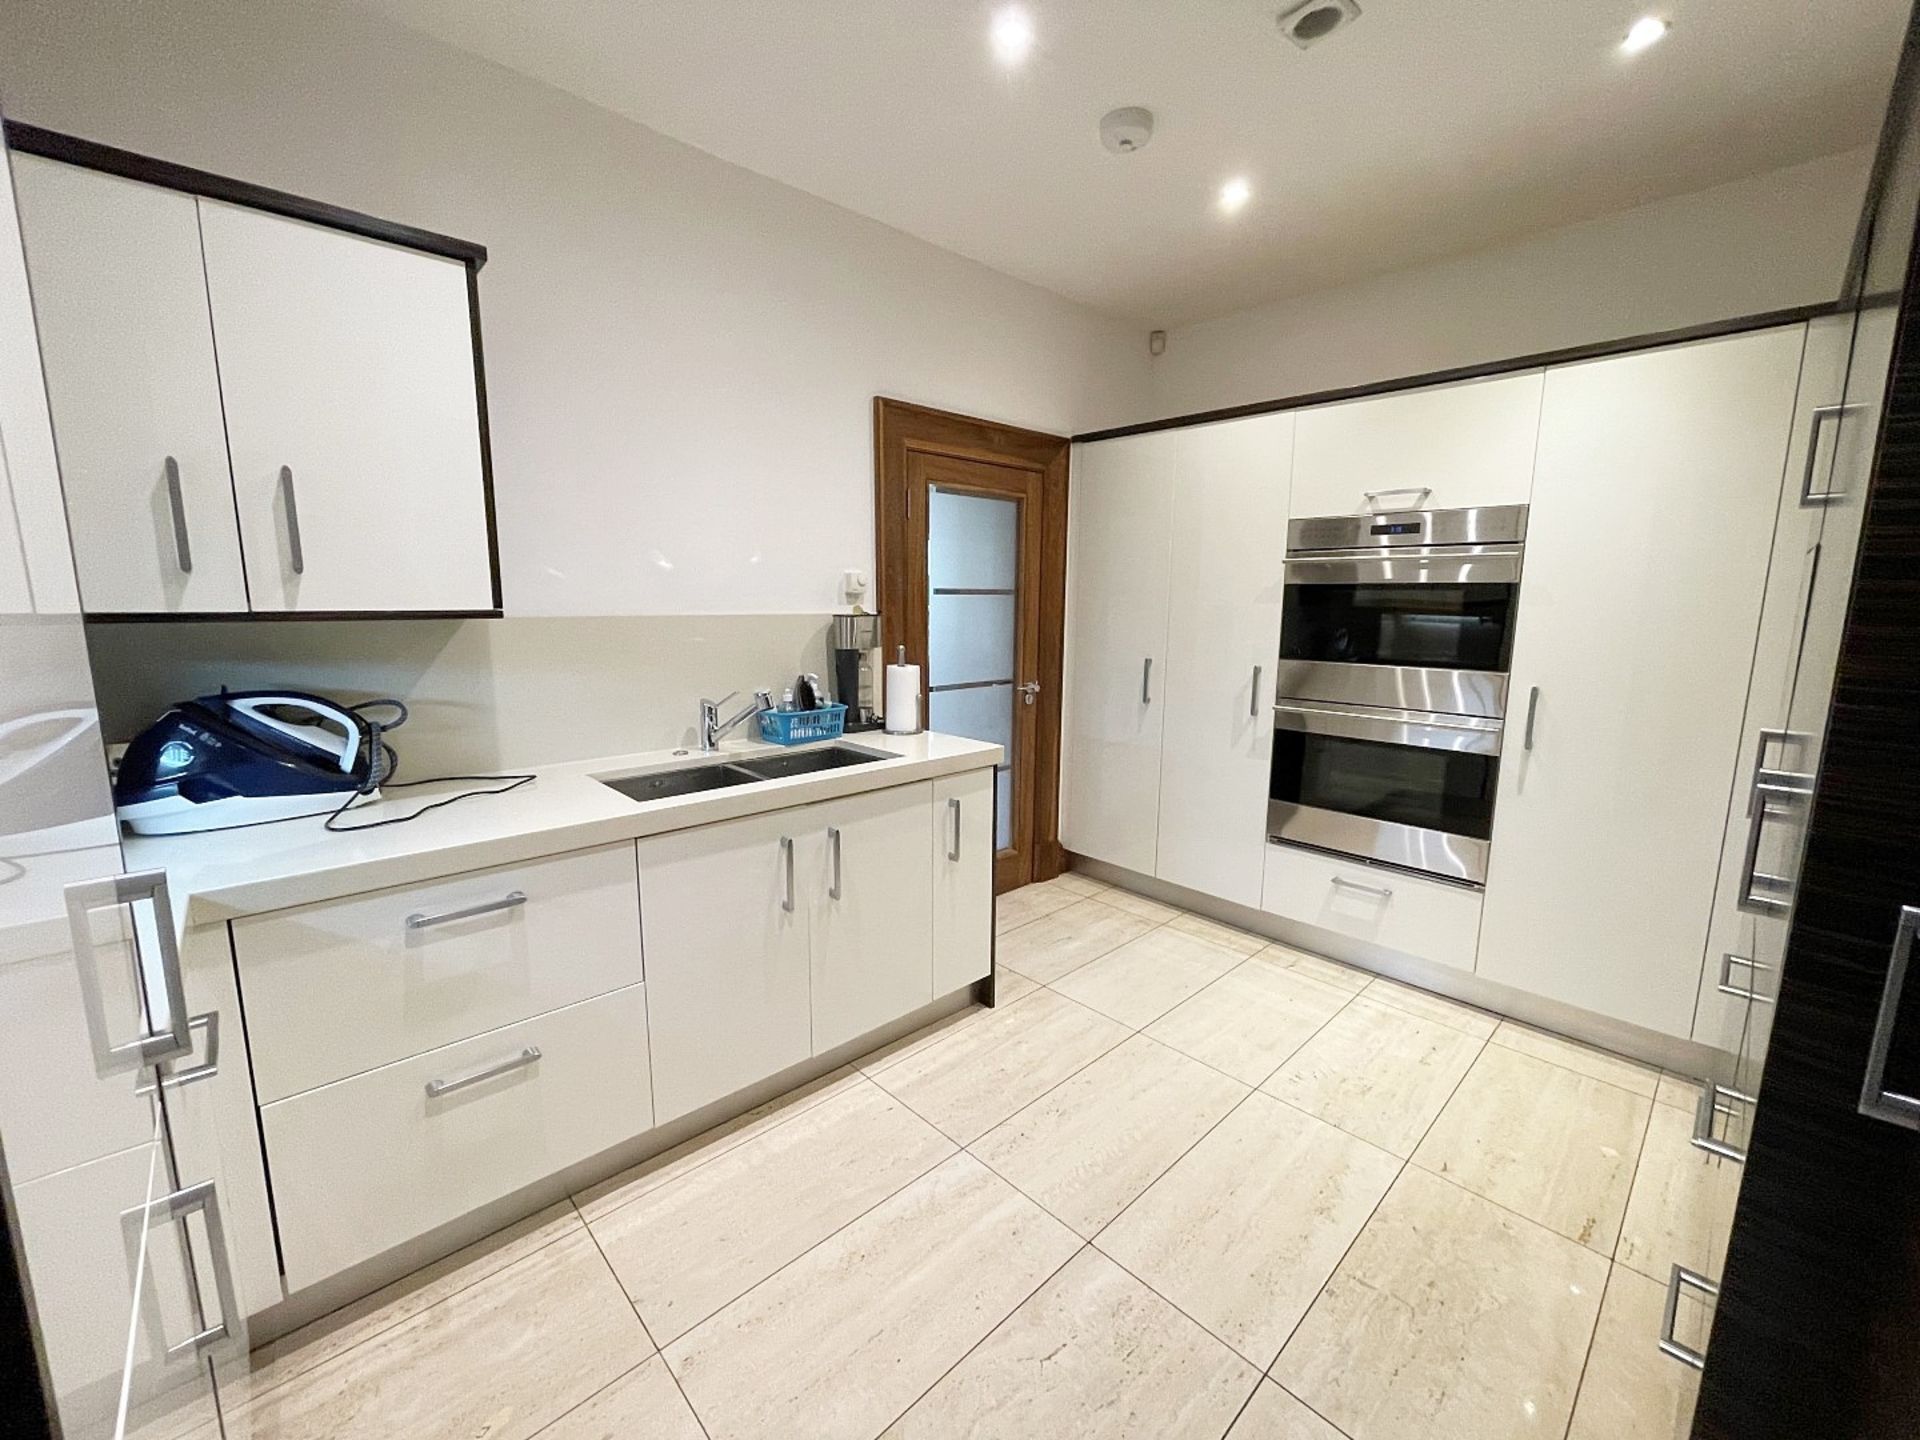 1 x Bespoke Fitted Mowlem & Co Kitchen With Miele and Sub Zero Appliances & Granite Worktops -